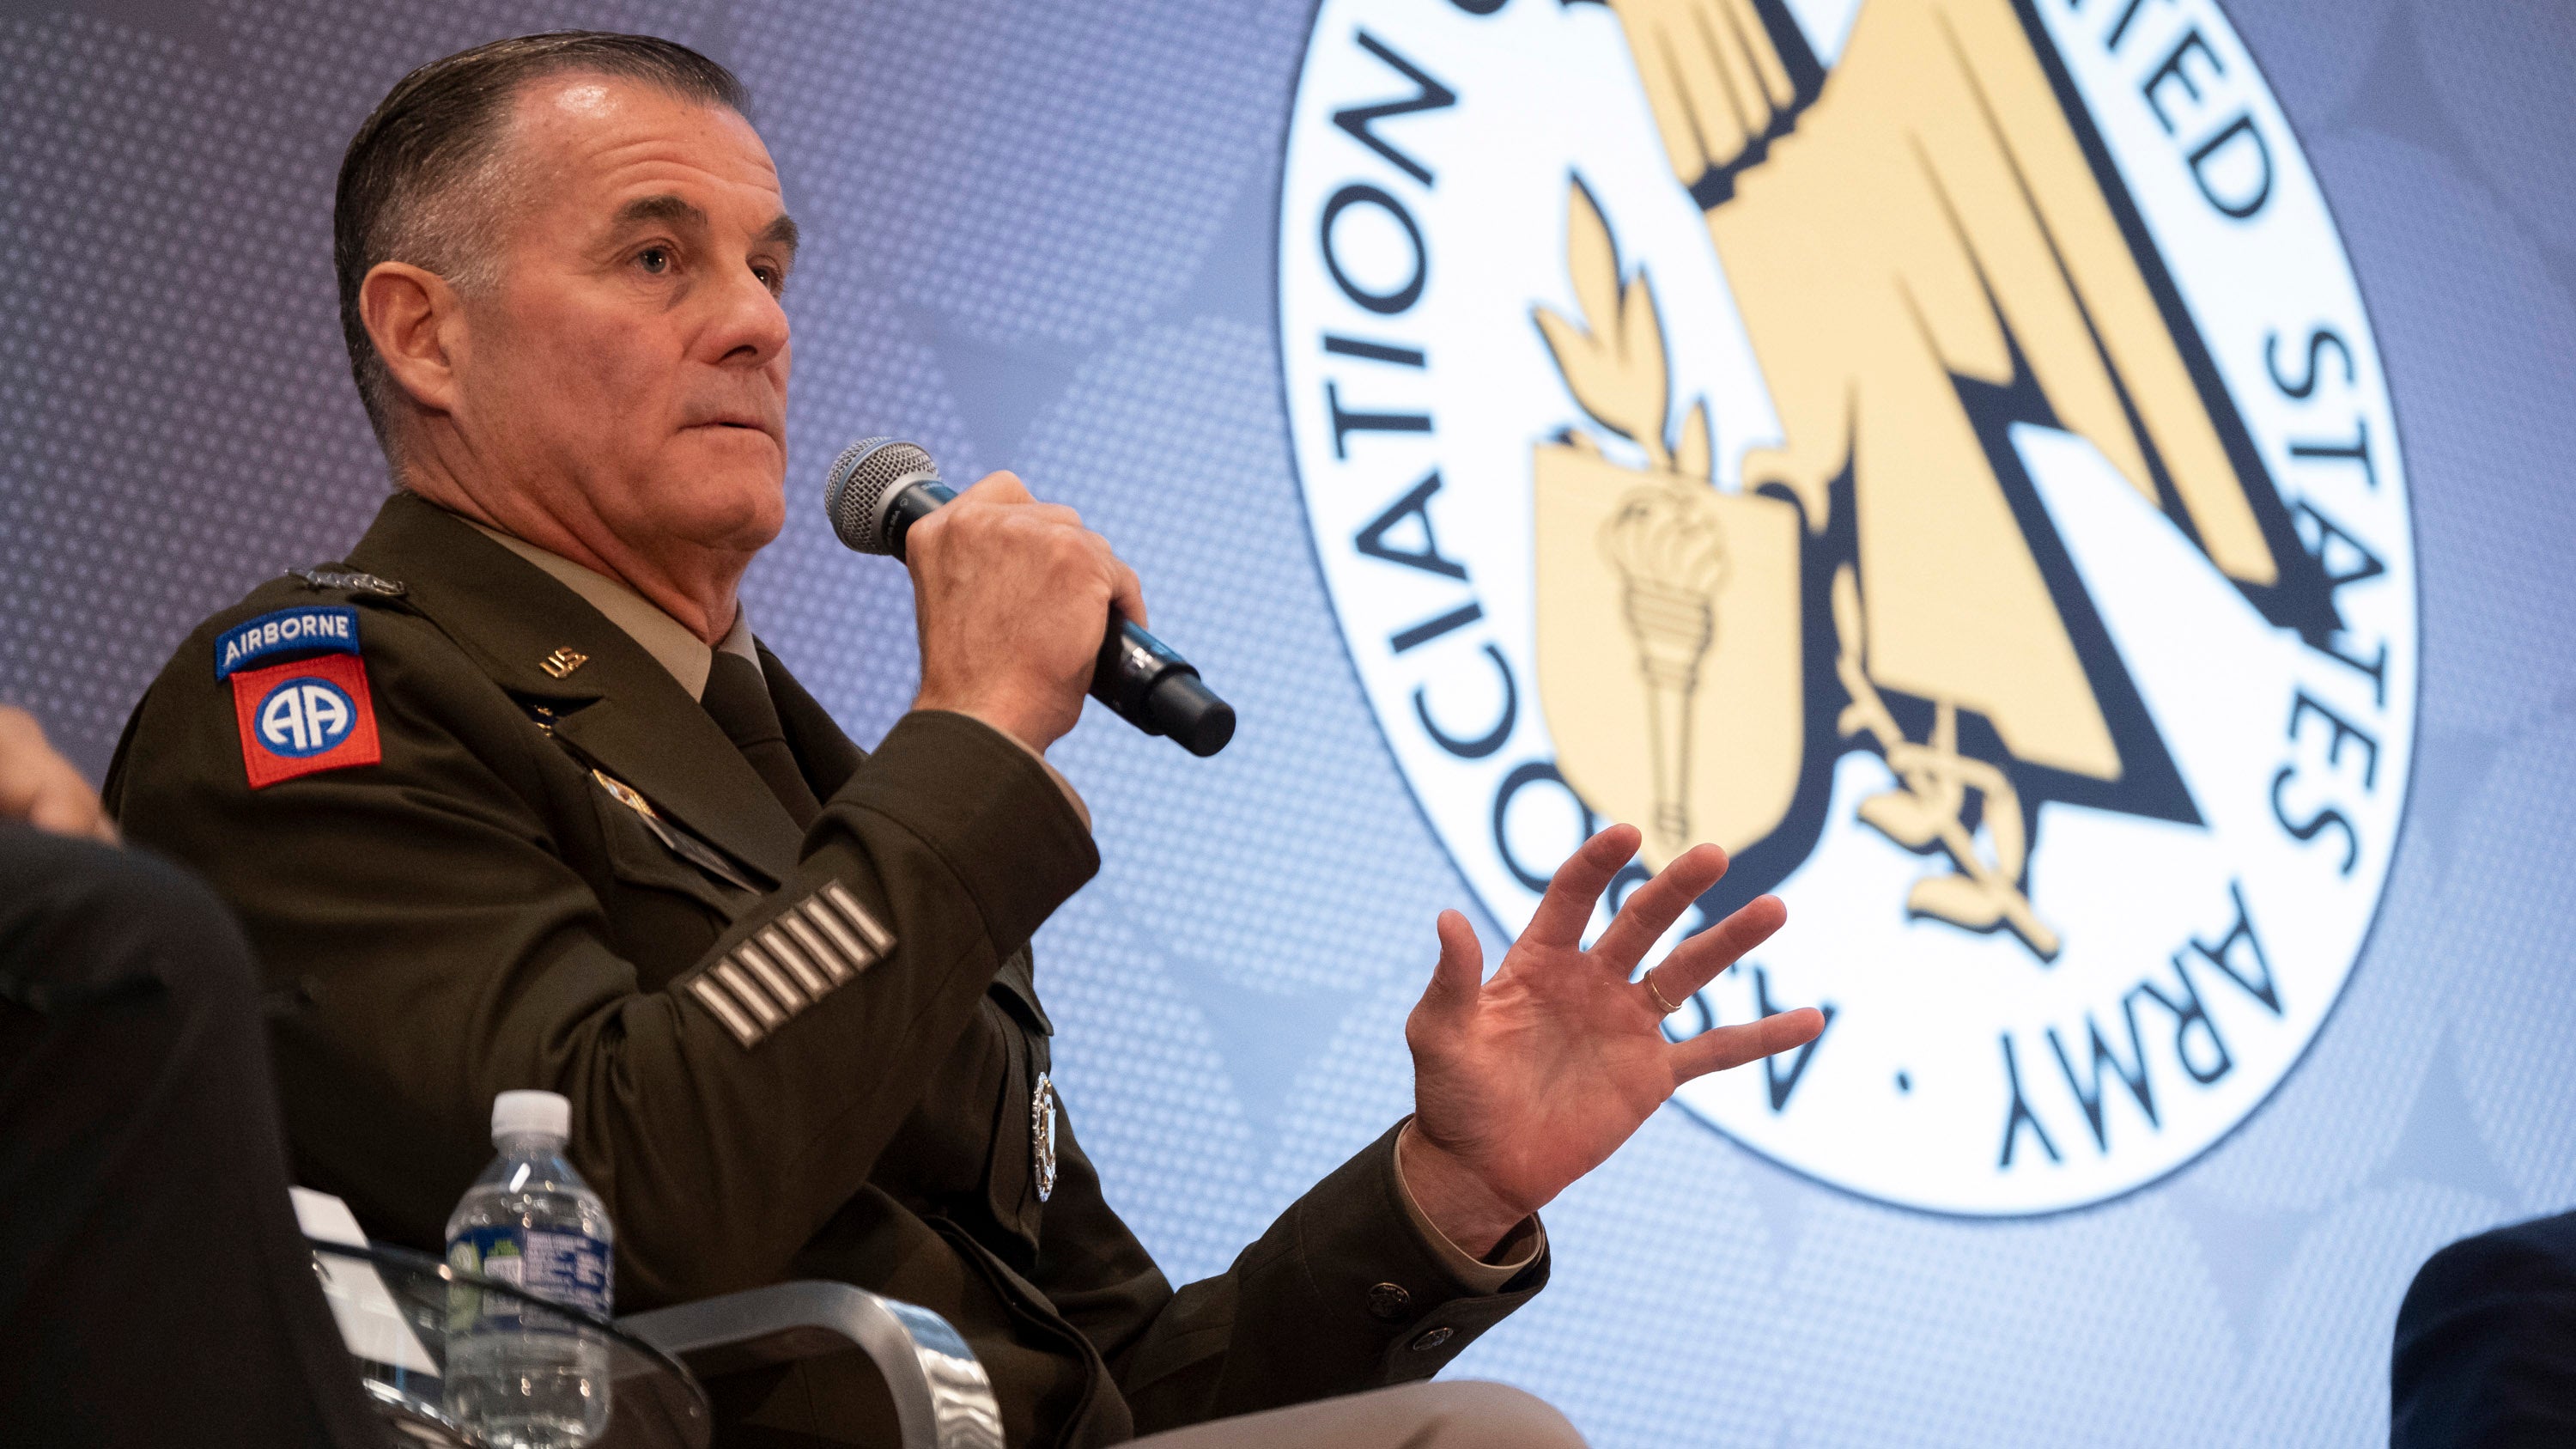 Gen. Charles Flynn, commanding general of US Army Pacific, speaks during the AUSA Contemporary Military Forum on Landpower and Integrated Deterrence in the Indo-Pacific at AUSA 2022 Annual Meeting in Washington, D.C., Tuesday, Oct. 11, 2022. (T.J. Kirkpatrick for AUSA)